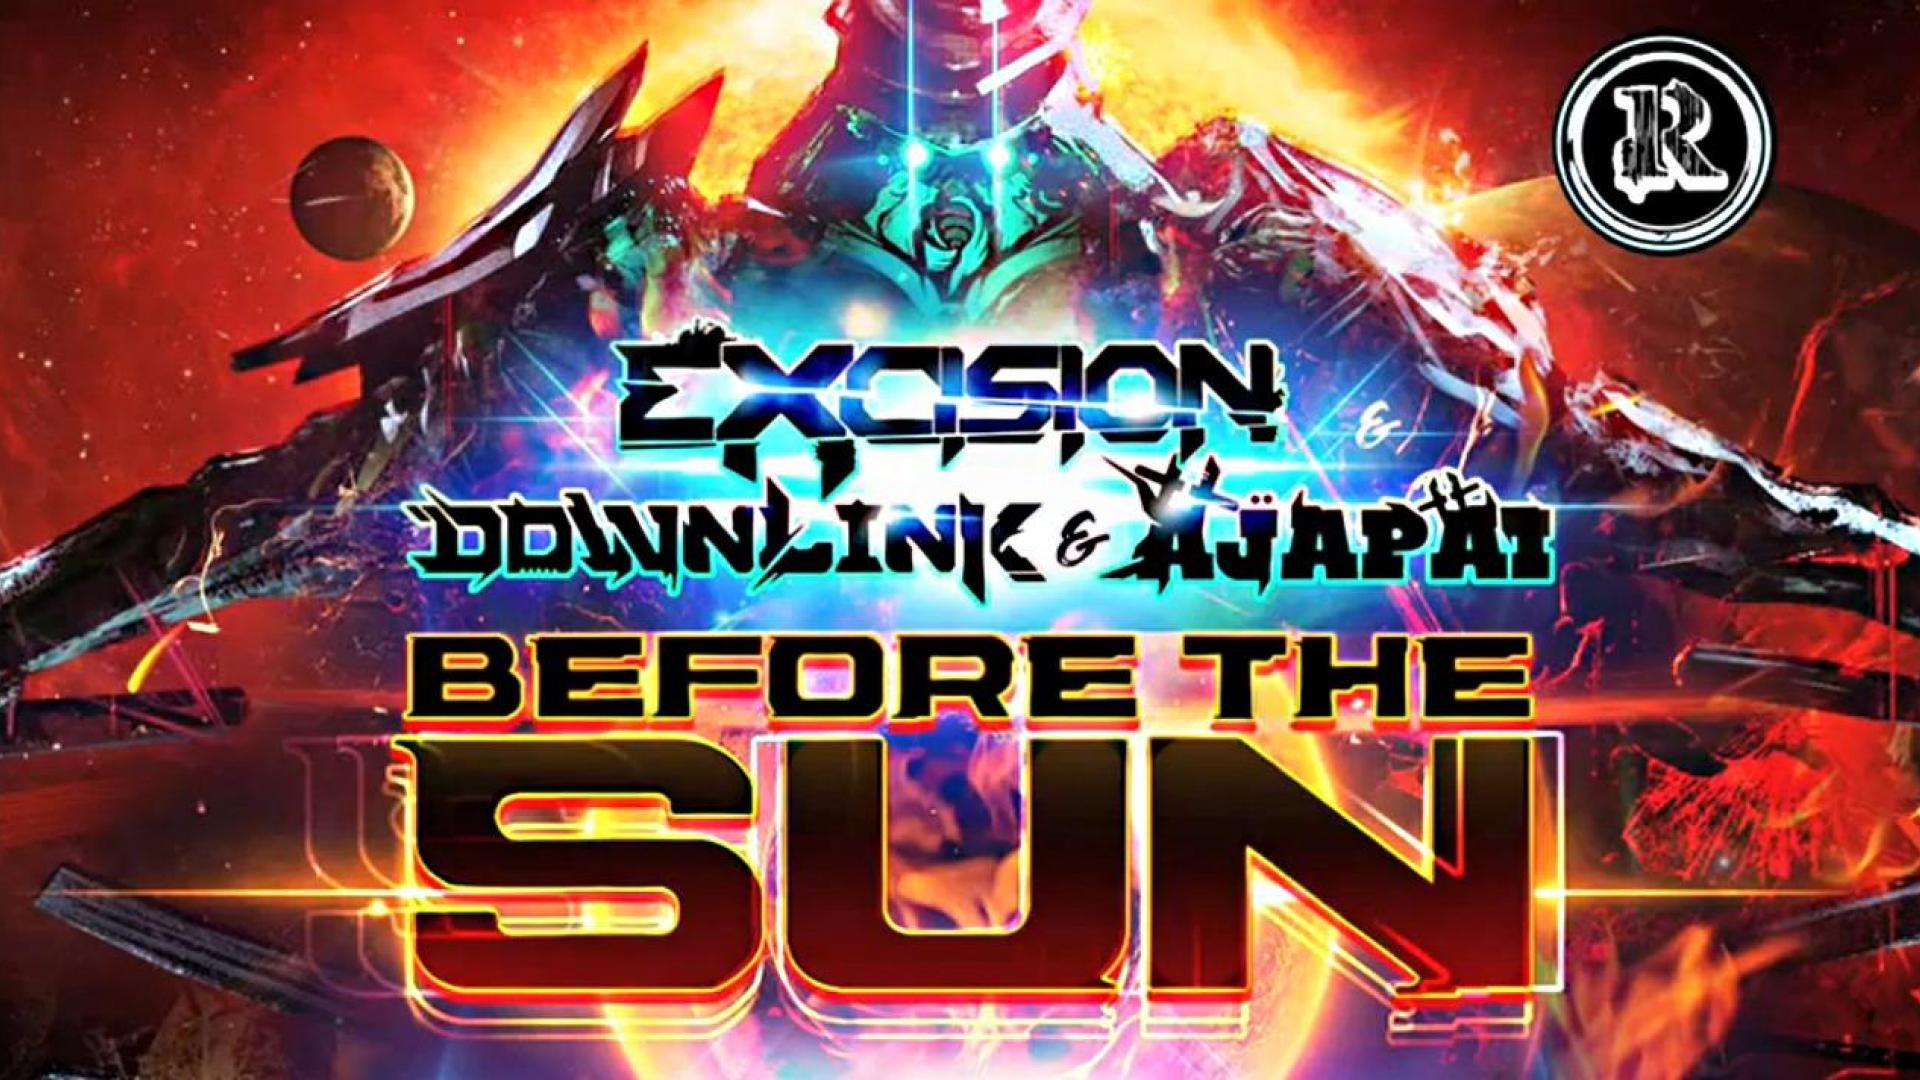 Excision Wallpaper HD